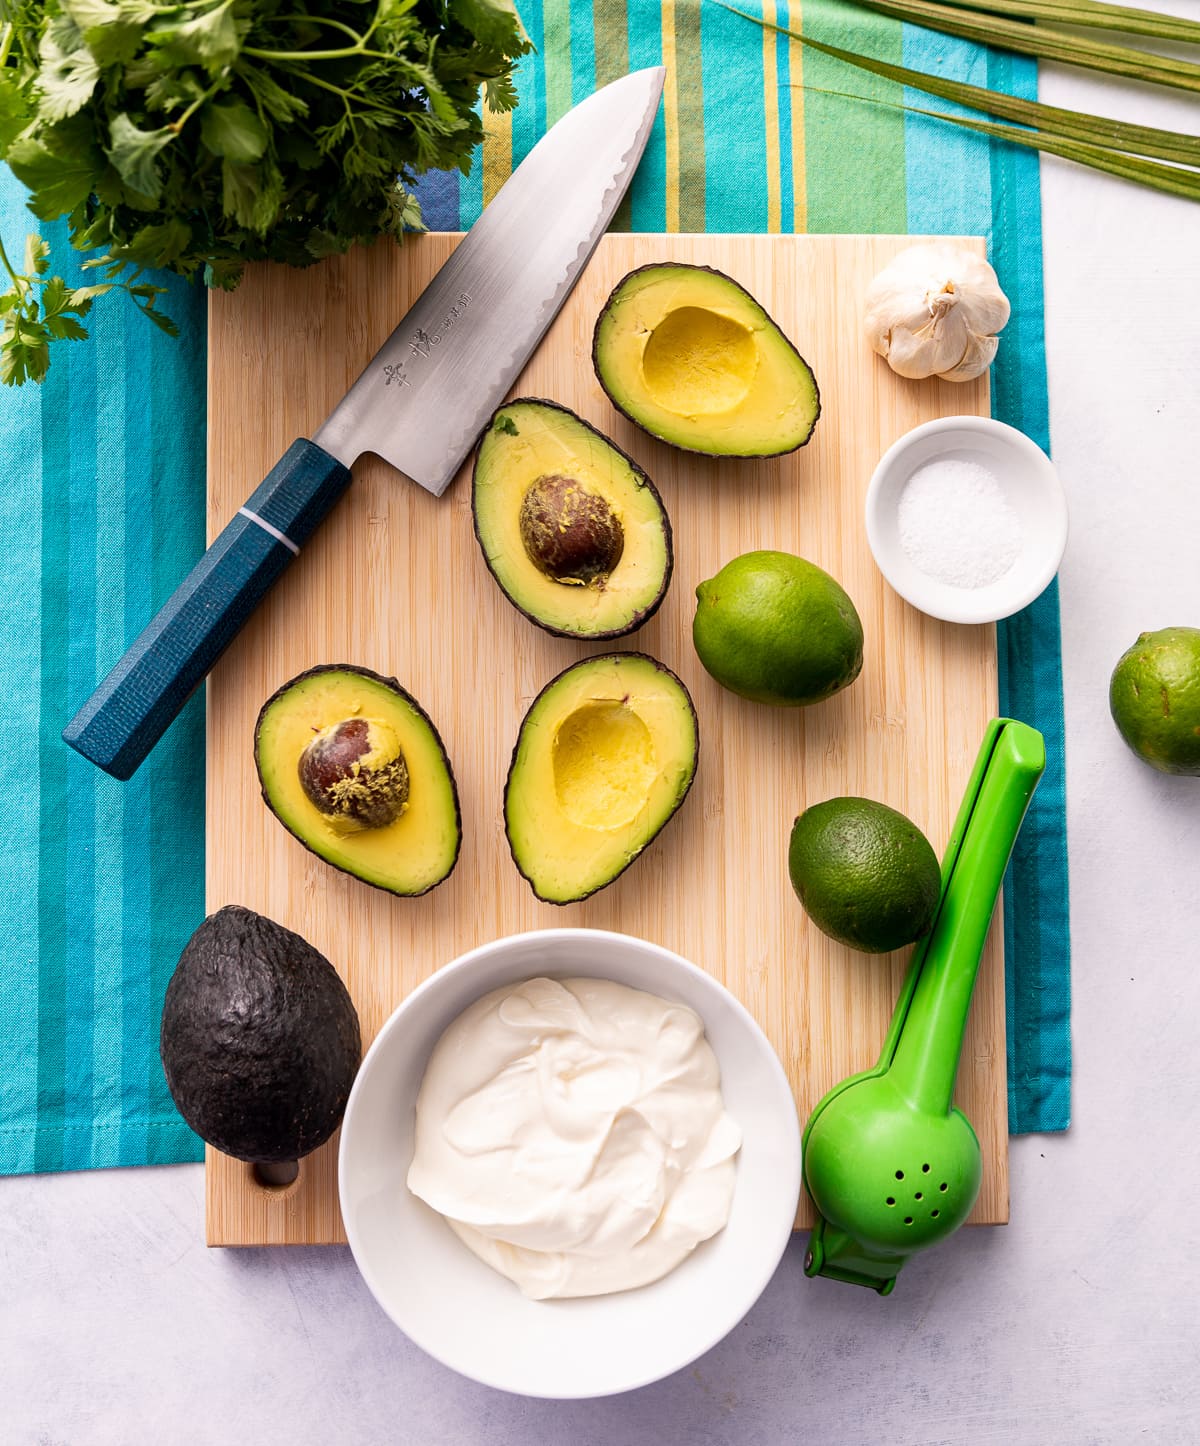 cutting board with avocados sliced in half whole limes knife with blue handle bowl of white sour cream green citrus press